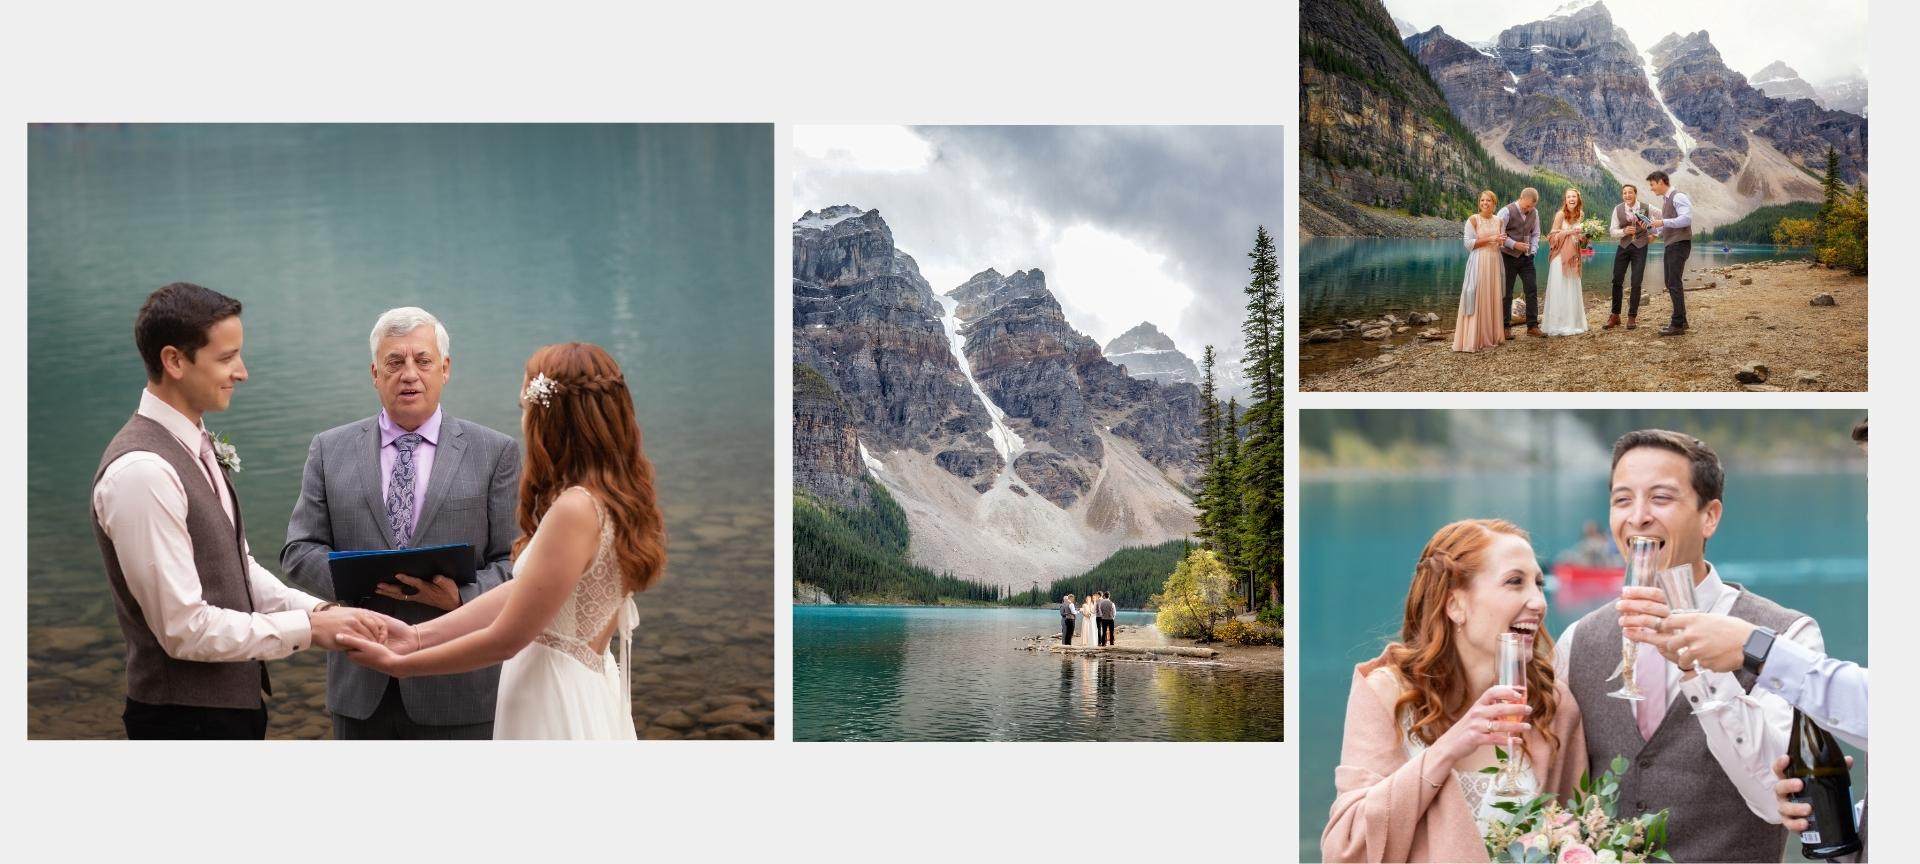 rocky mountains elopement pckage at moraine lake - wedding ceremony at banff national park